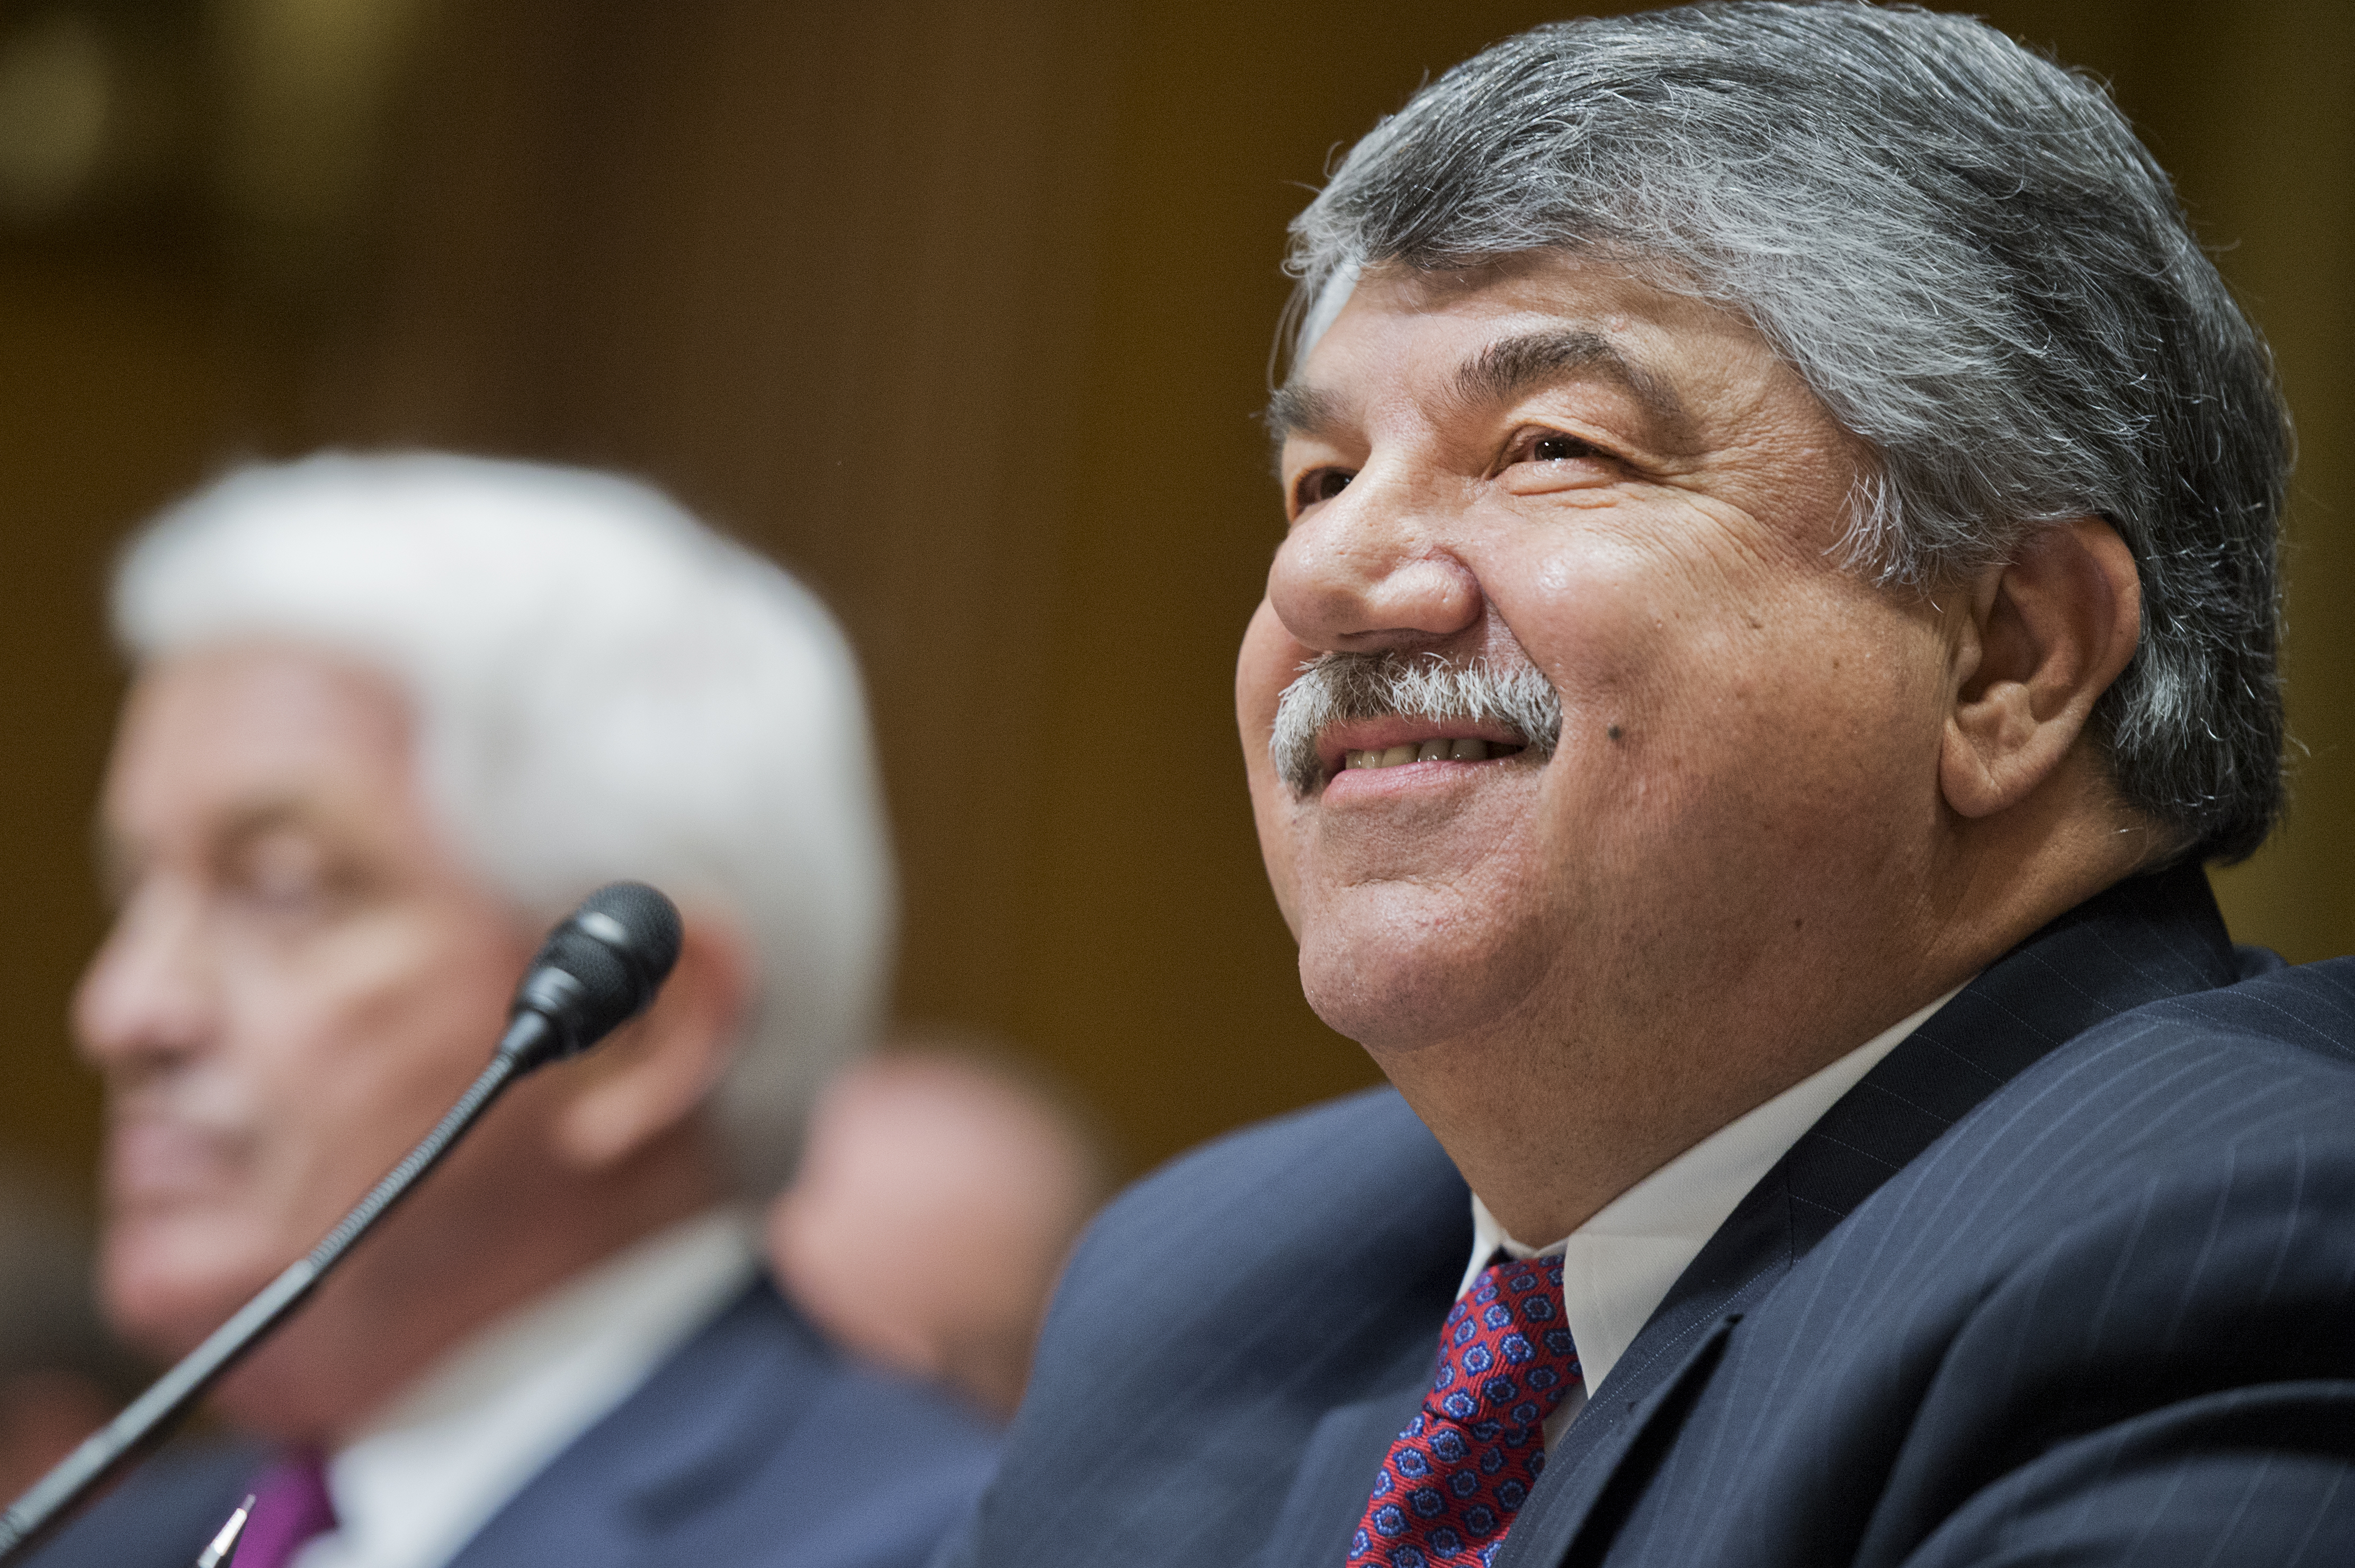 Richard Trumka, right, president of the AFL-CIO prepare to testify before a Senate Finance Committee hearing on April 21, 2015. (Tom Williams—CQ-Roll Call,Inc.)